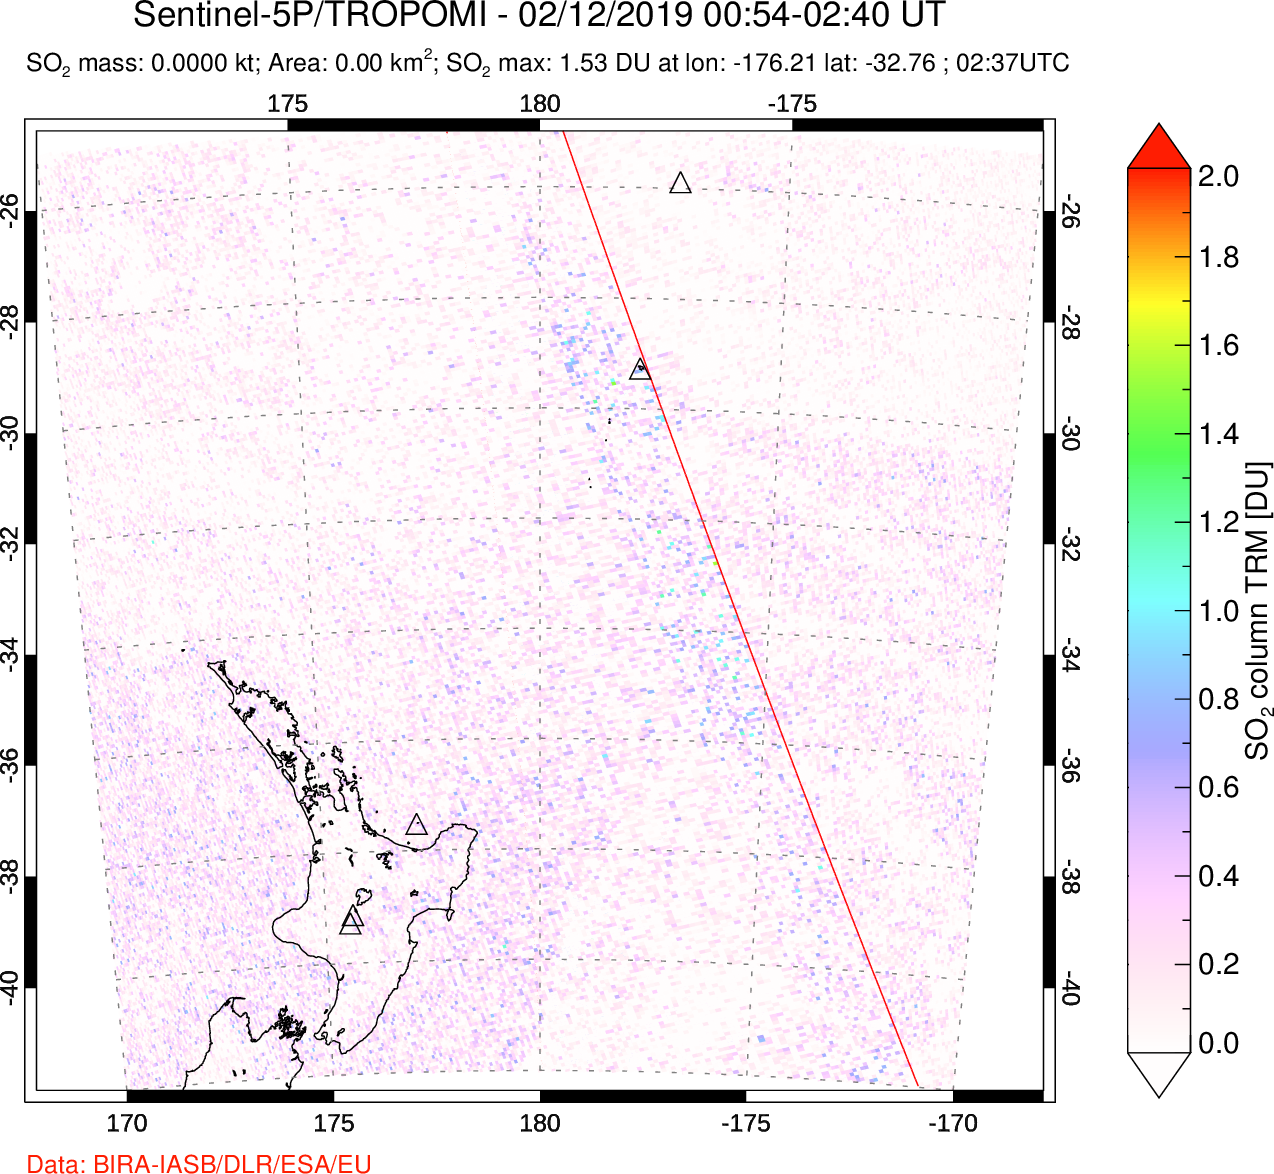 A sulfur dioxide image over New Zealand on Feb 12, 2019.